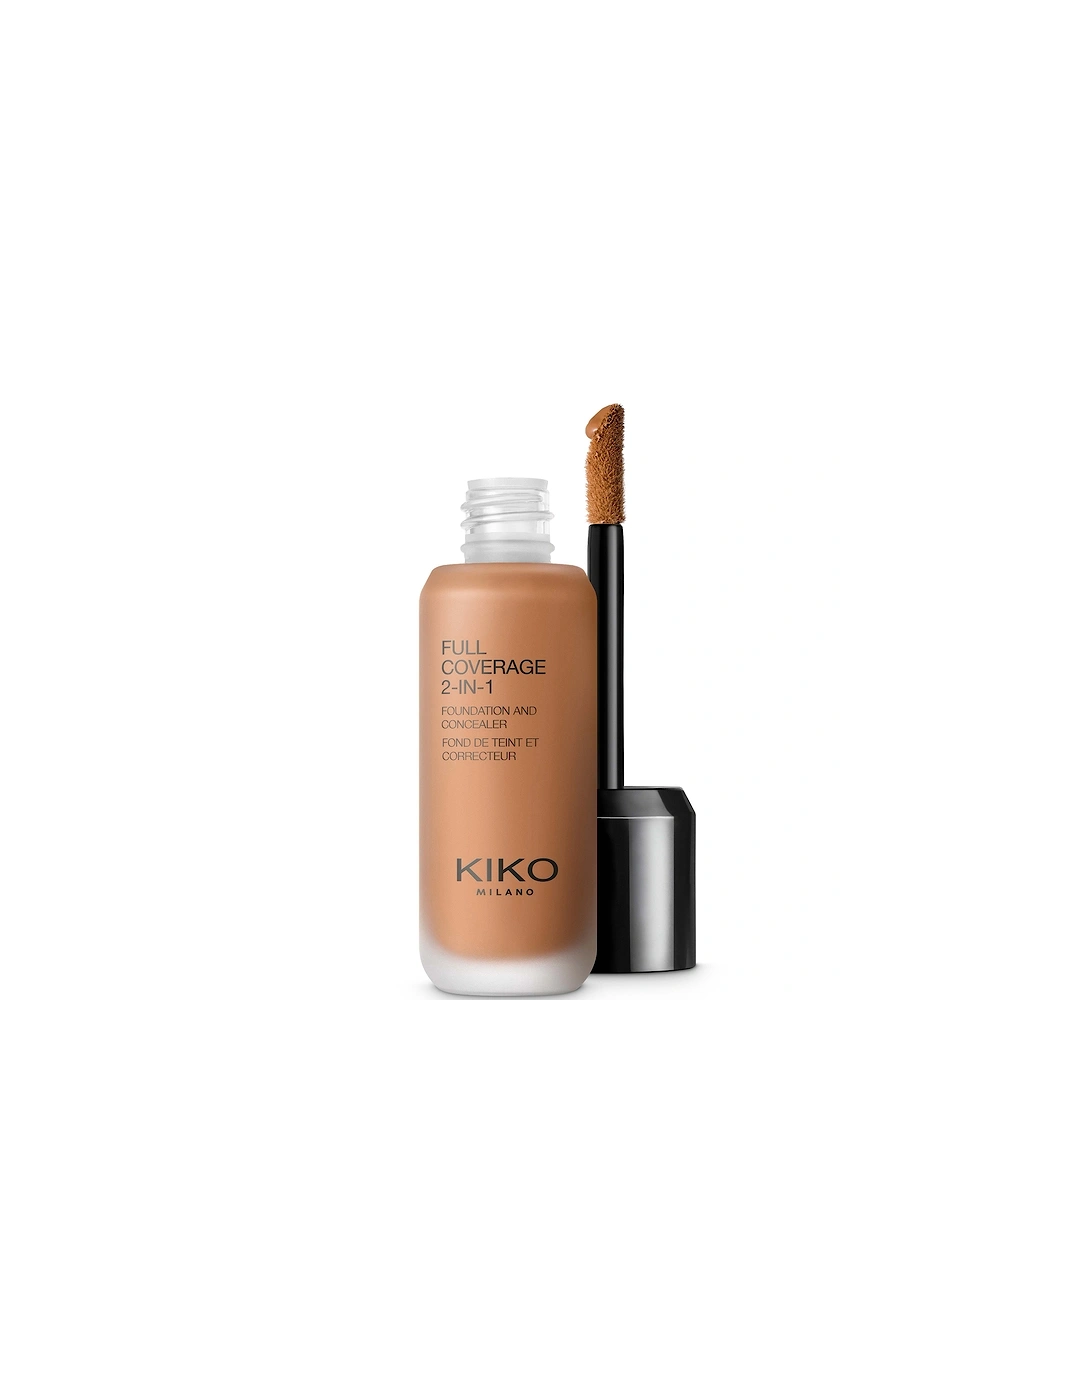 Full Coverage 2-in-1 Foundation and Concealer 25ml - 145 Neutral, 2 of 1